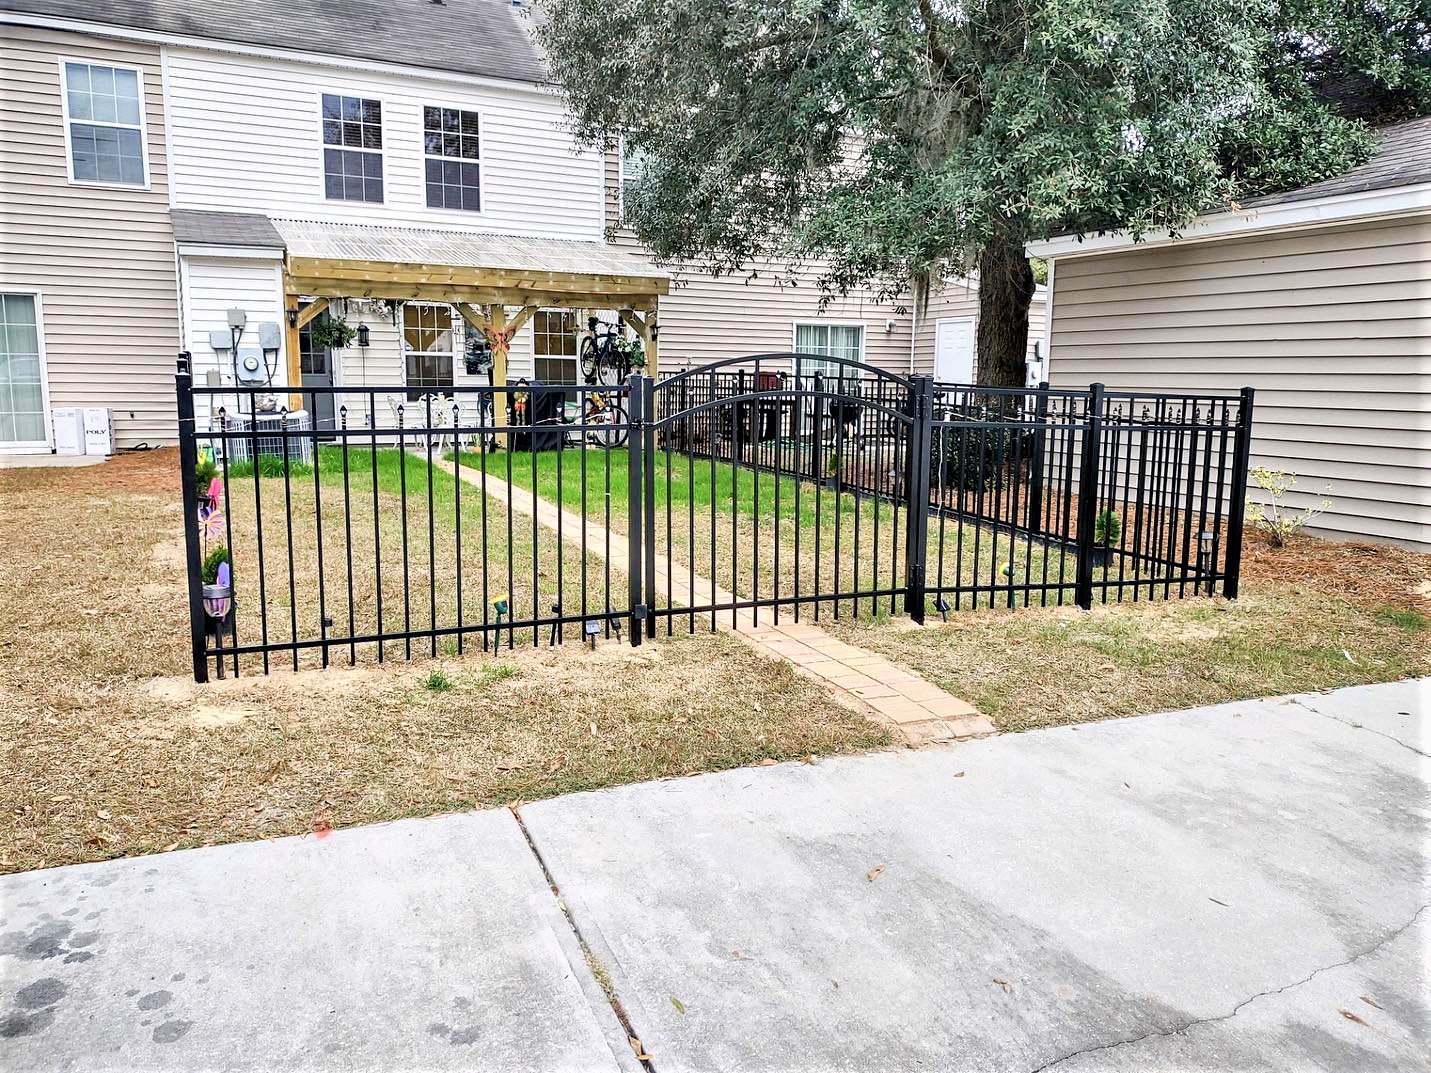 Photo of a black aluminum fenced in yard